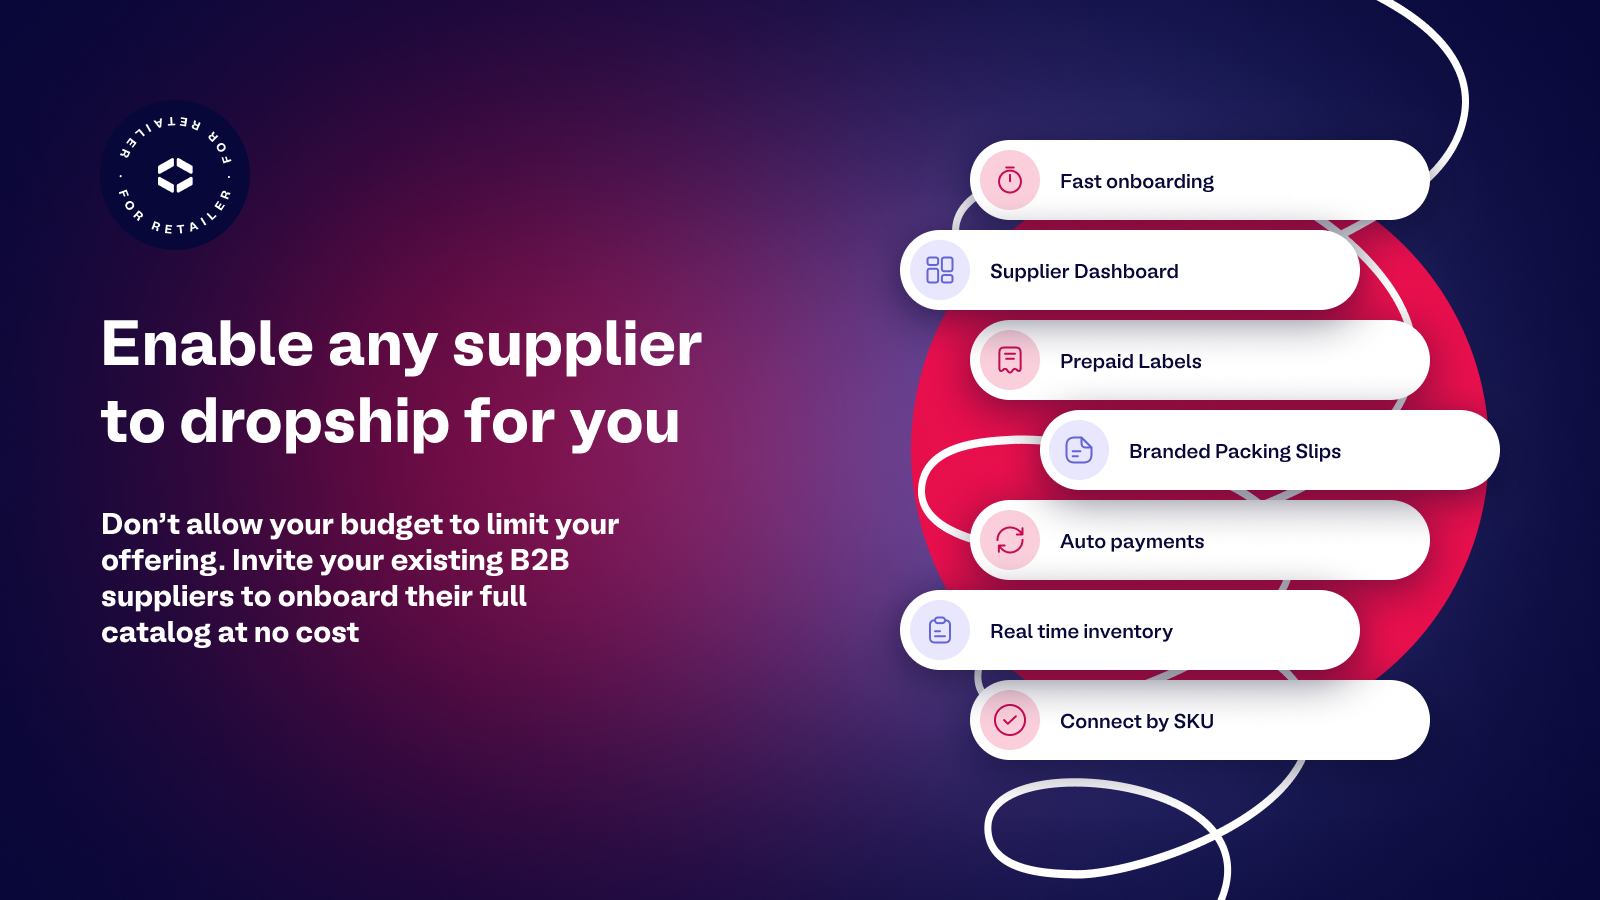 Automate every step of the dropship lifecycle with all suppliers